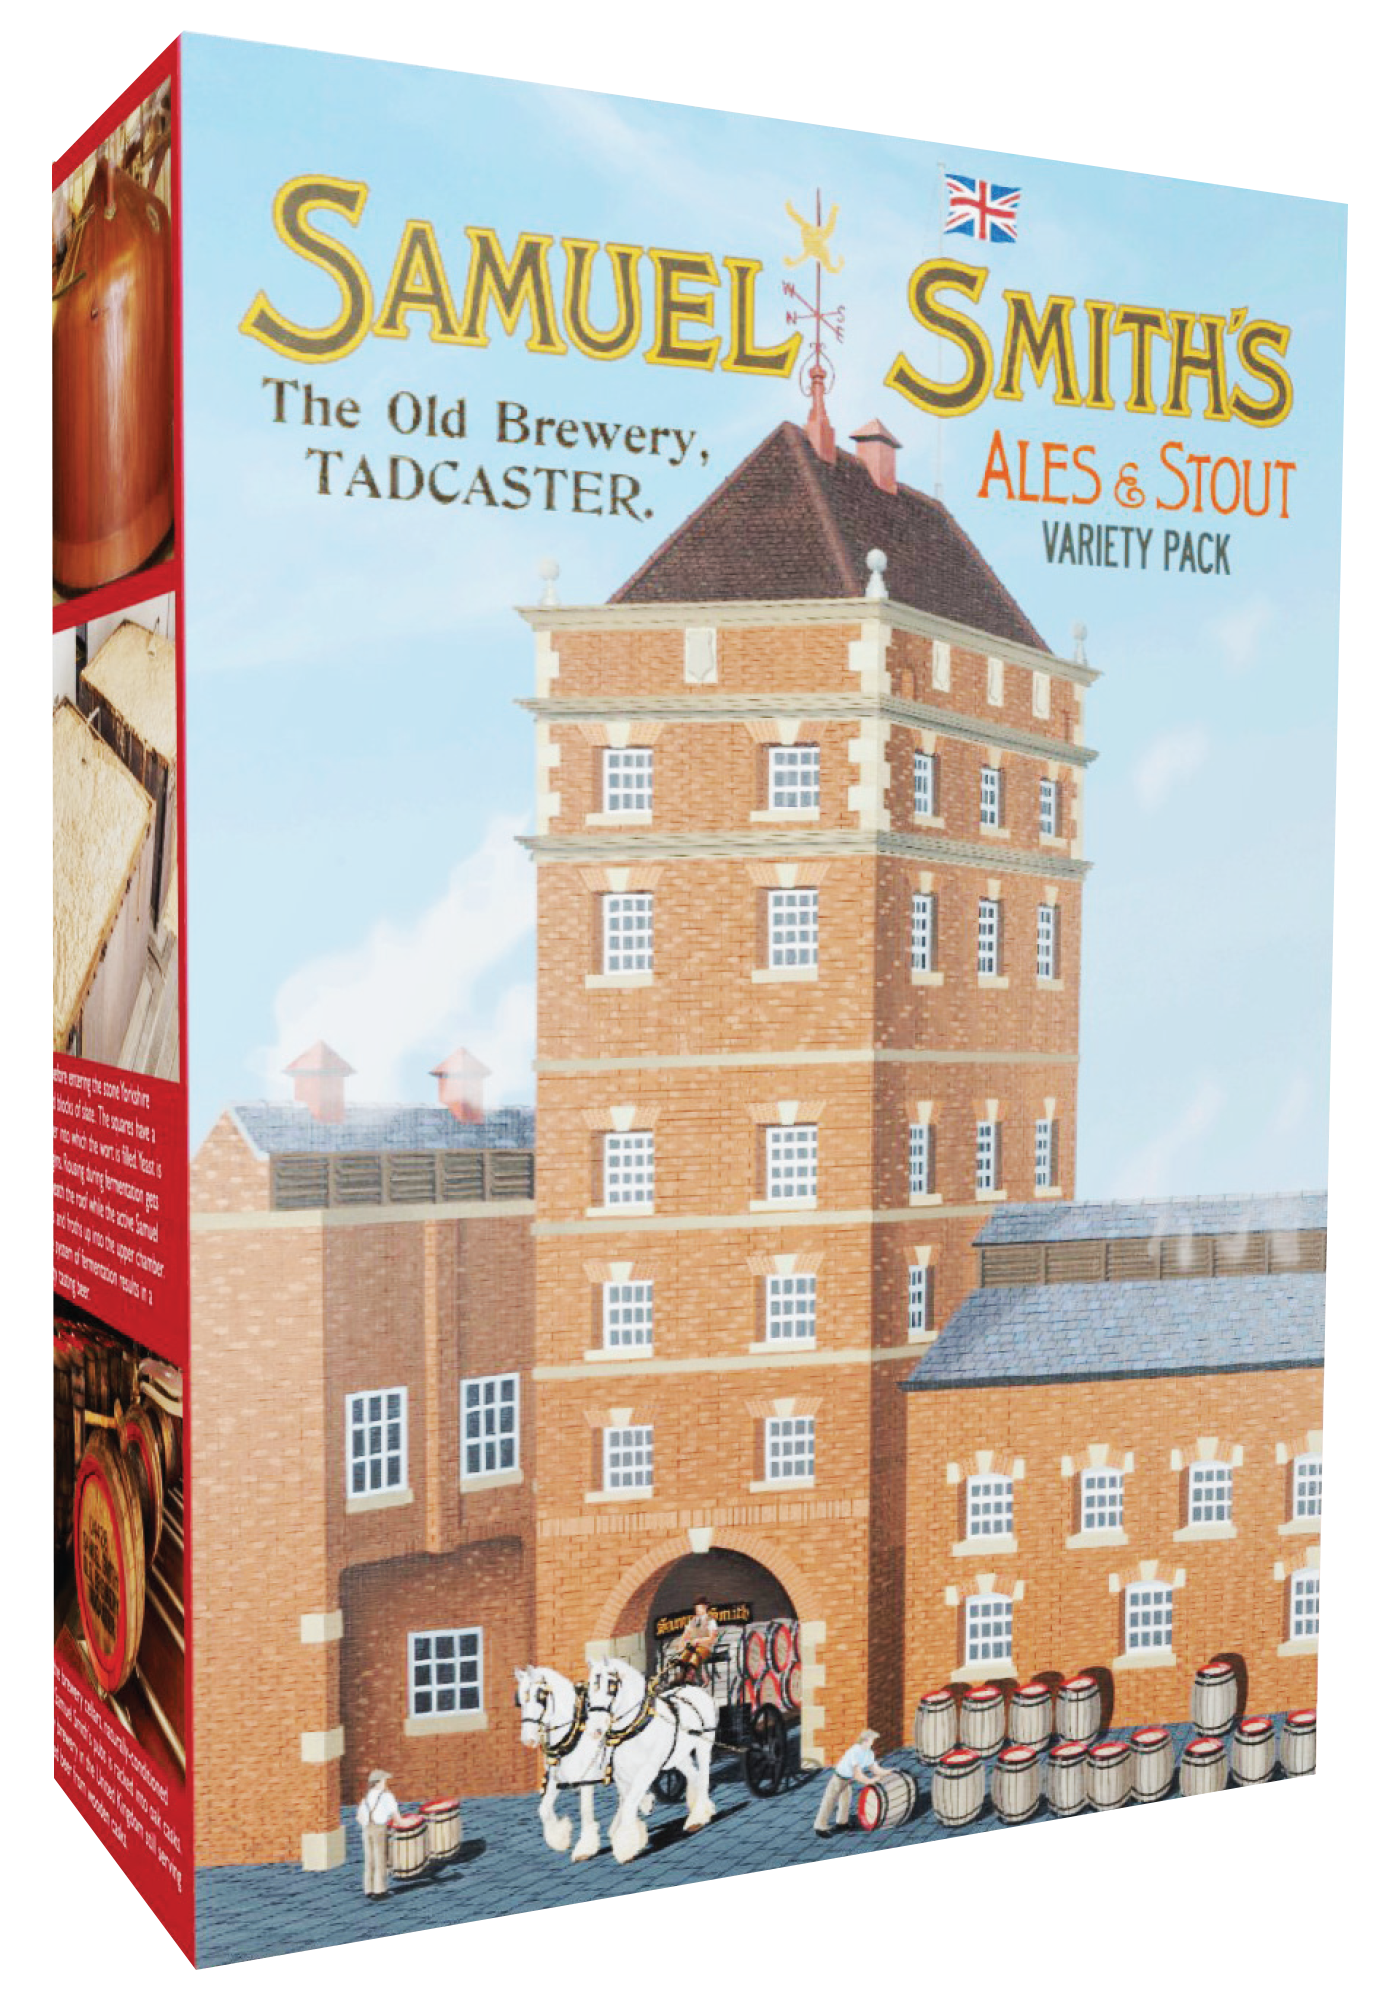 Introducing Samuel Smith’s Variety Pack